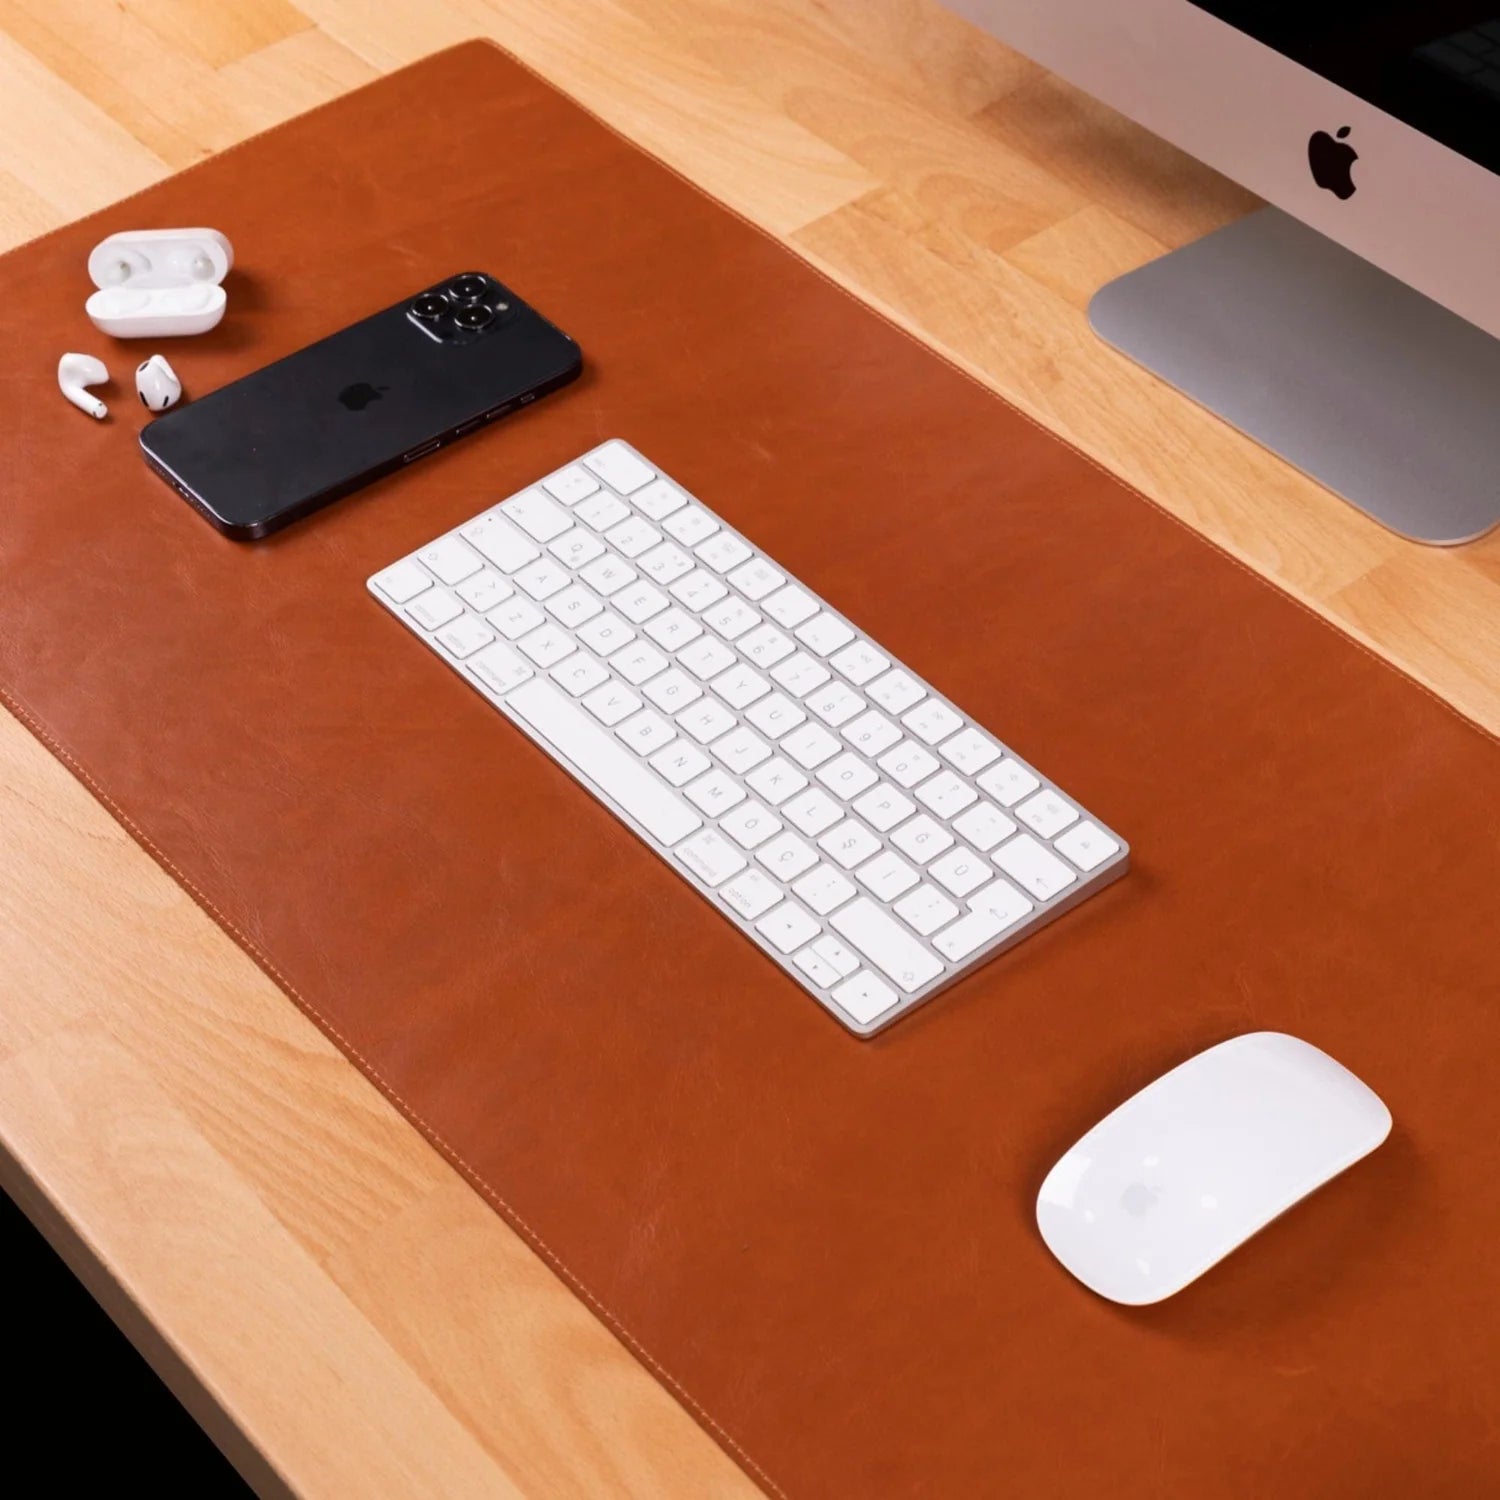 CLEAN AND ORGANIZED OFFICE SPACE BEGINS WITH DESK PADS - TORONATA